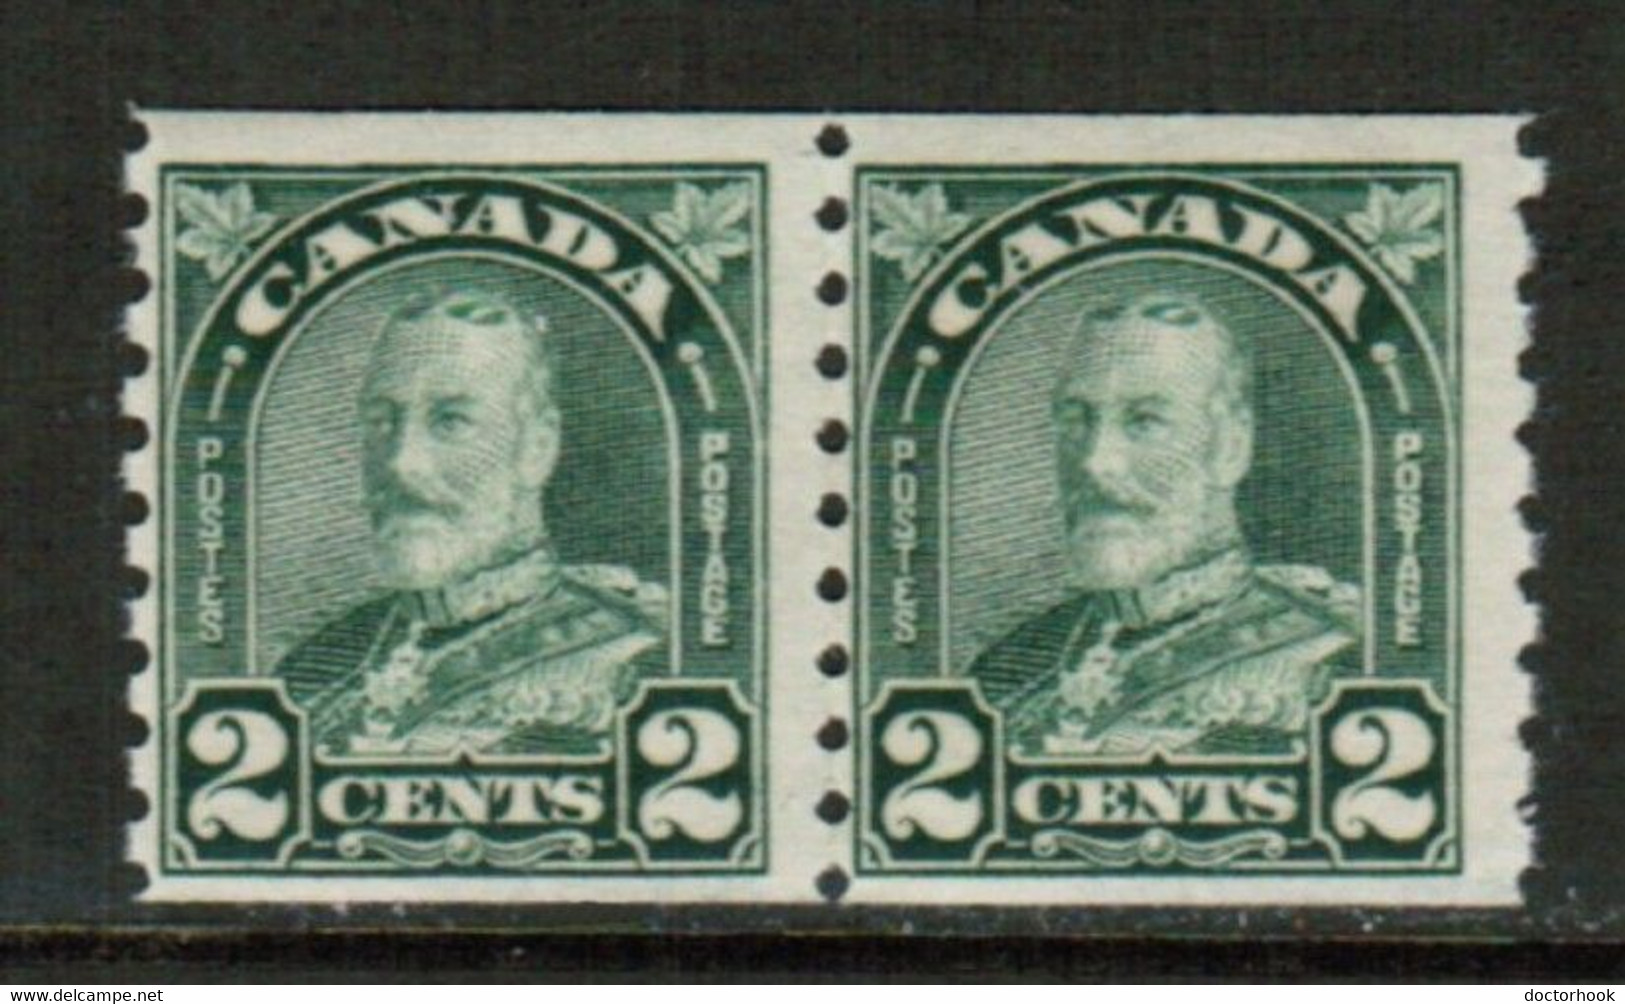 CANADA  Scott # 180* F-VF MINT LH PAIR (Stamp Scan # 783) - Roulettes